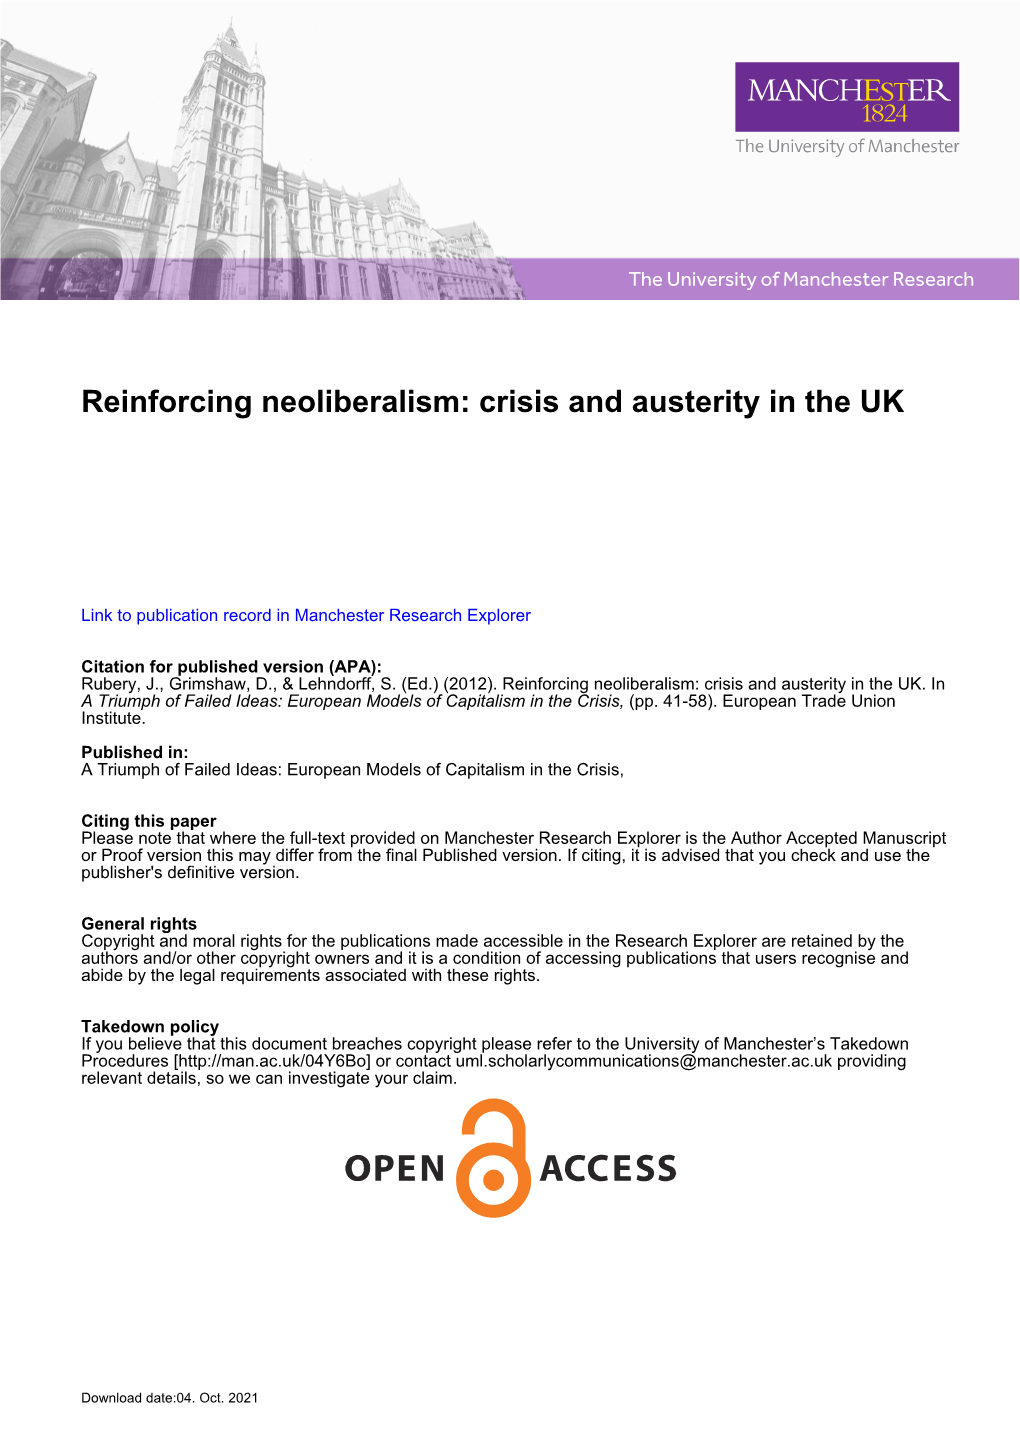 Reinforcing Neoliberalism: Crisis and Austerity in the UK